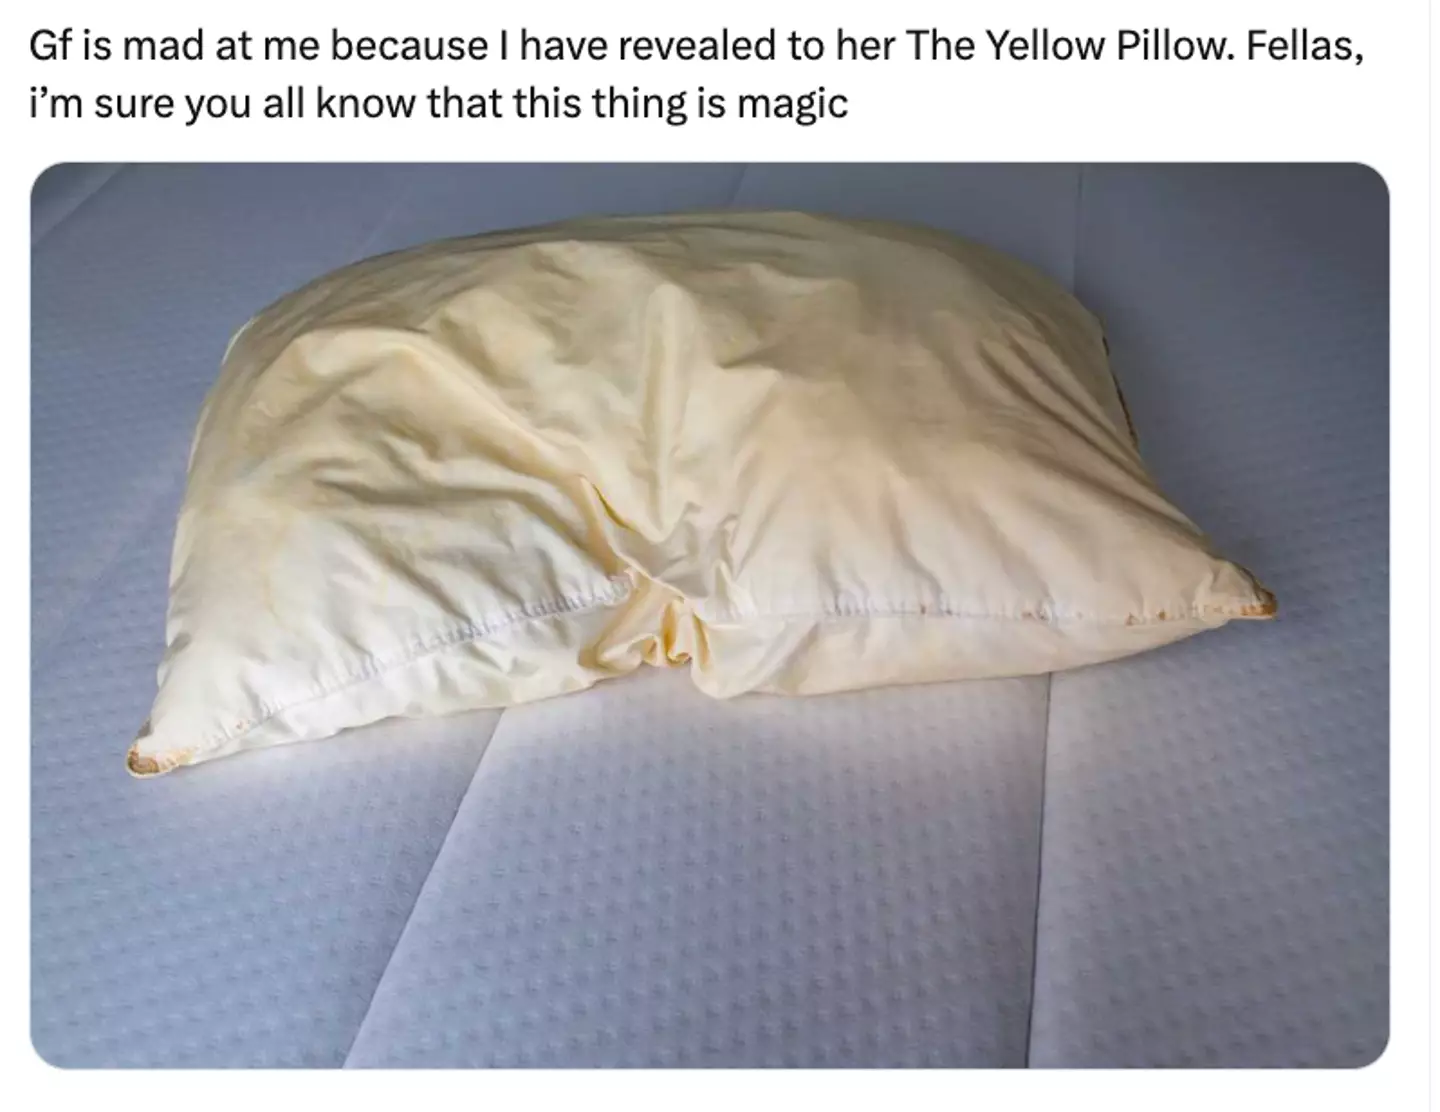 The Yellow Pillow sparked debate online.